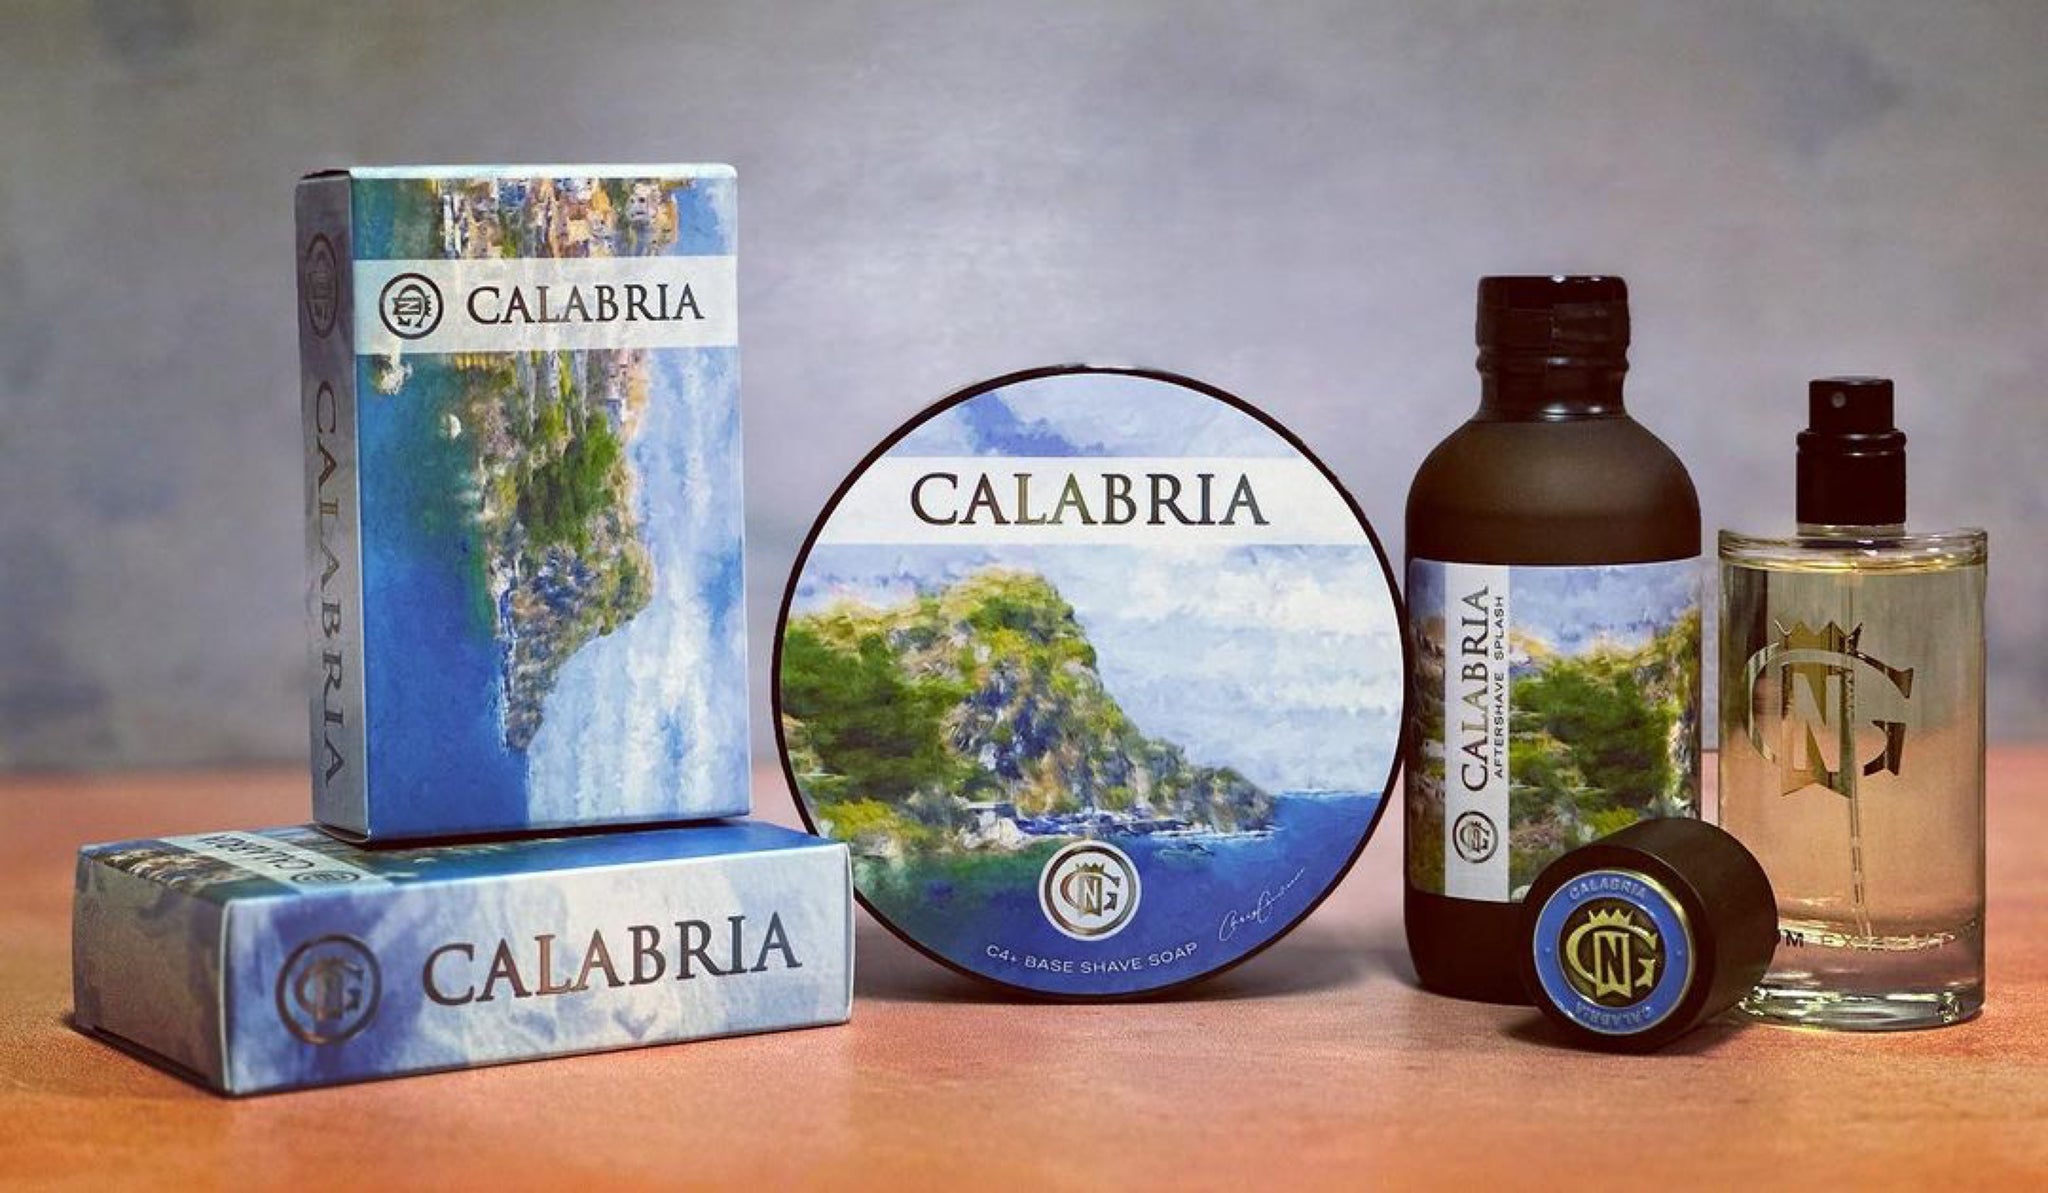 Calabria Parfum & Shave Gift Set (Trotter Seaglass #21 - T1 Knot)